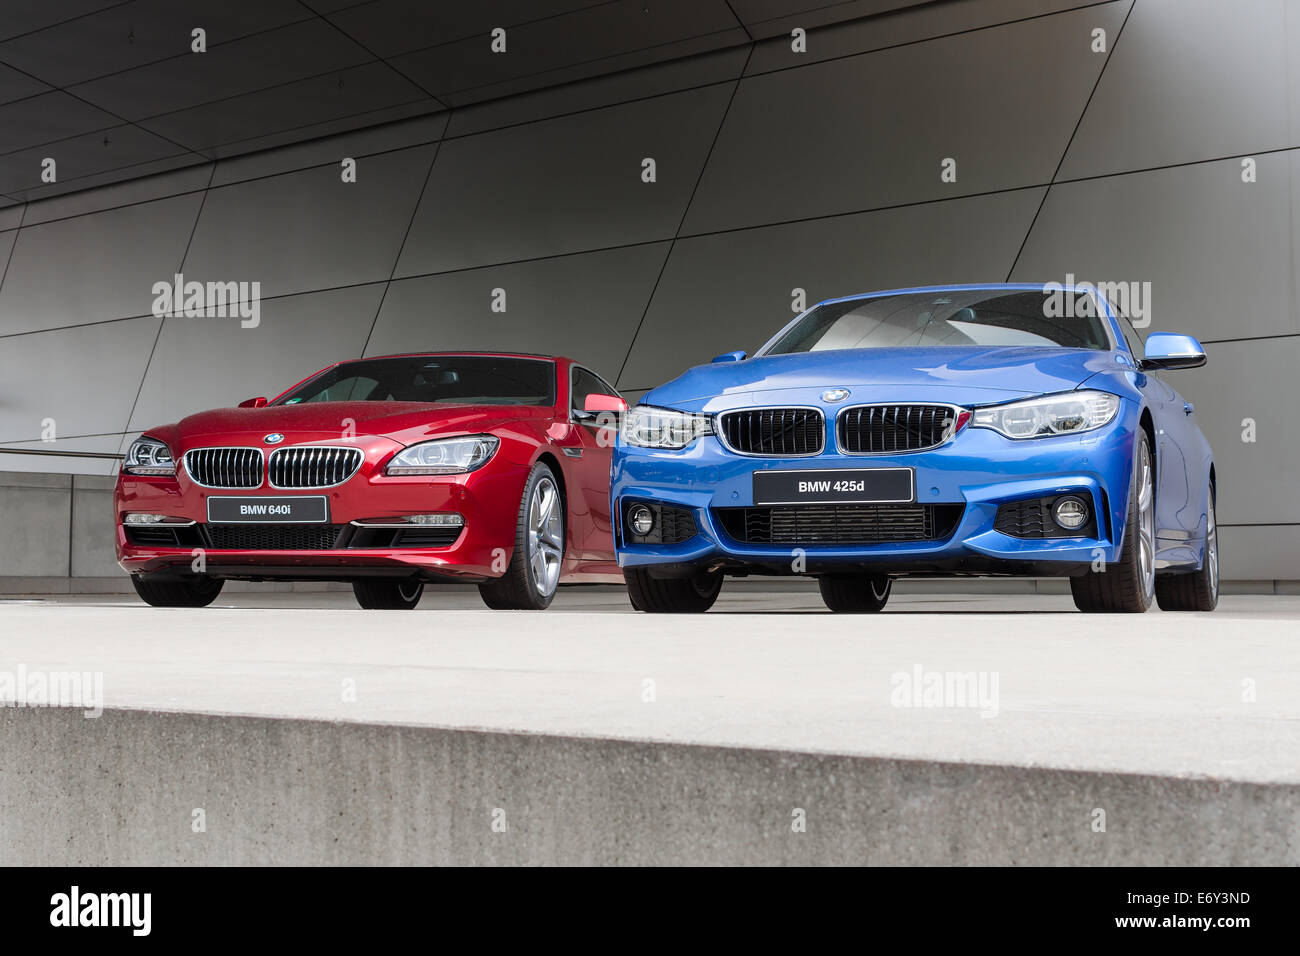 MUNICH, GERMANY - AUGUST 9, 2014: New modern models of executive business class BMW cars. Red 640i and blue 425d wet after rain Stock Photo